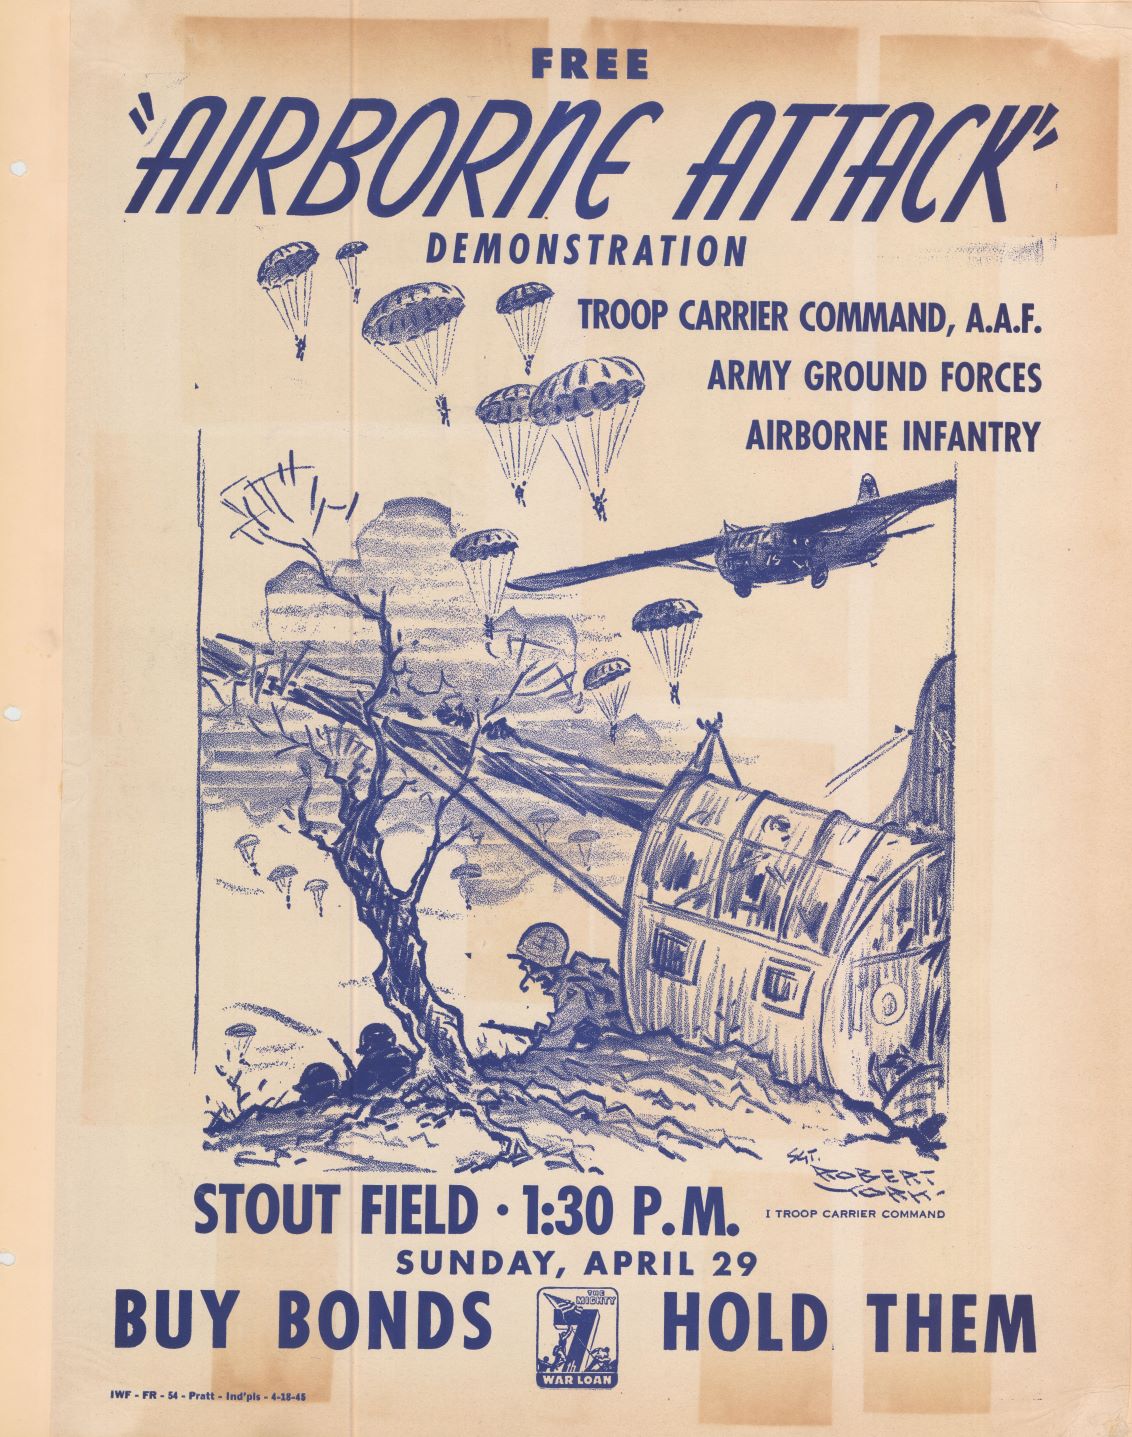 Poster advertising free "Airborne Attack" demonstration at Stout Field by the Troop Carrier Command, AAF; Army Ground Forces; and Airborne Infantry.